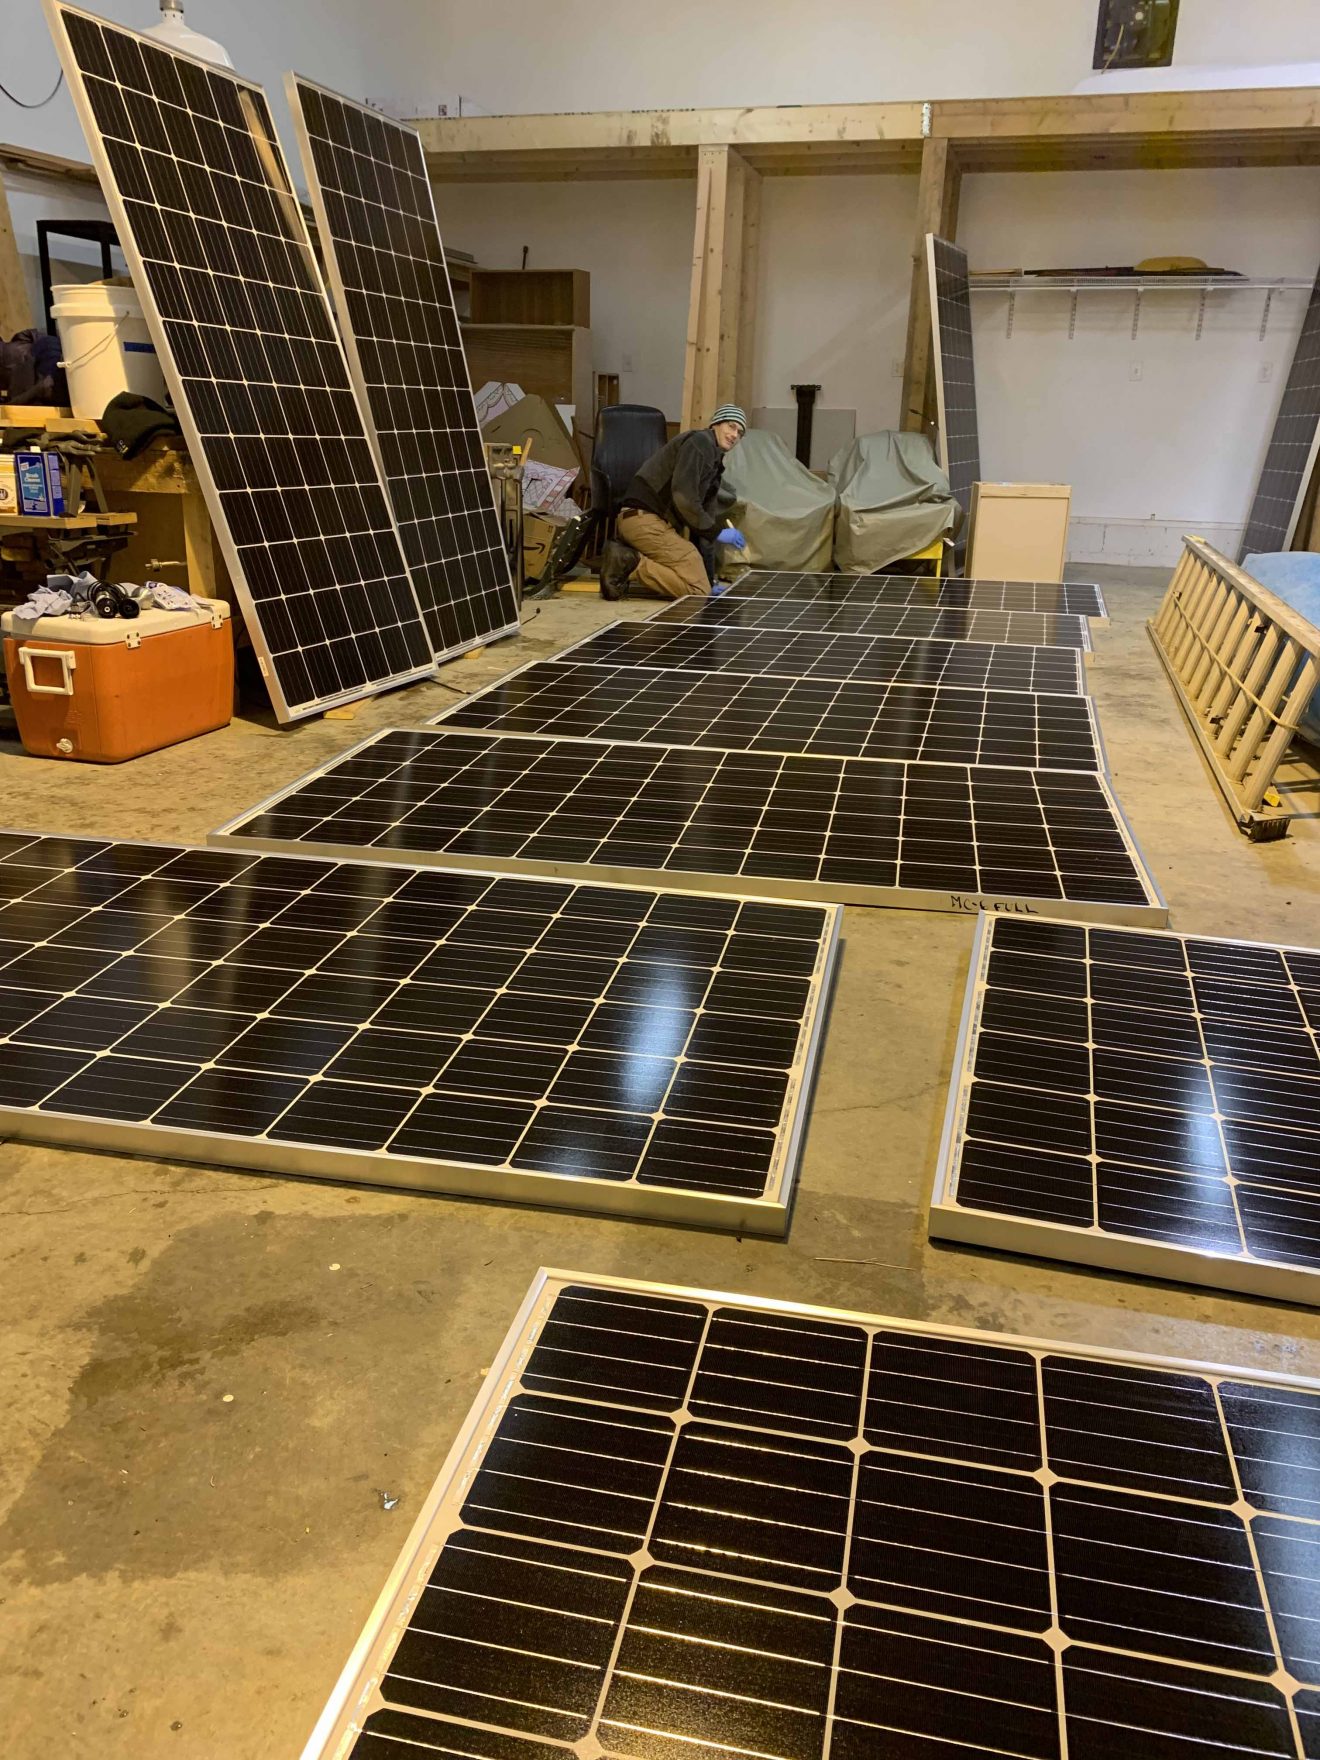 A room filled with solar panels on the floor and leaning against a bench. A person kneels in the background.